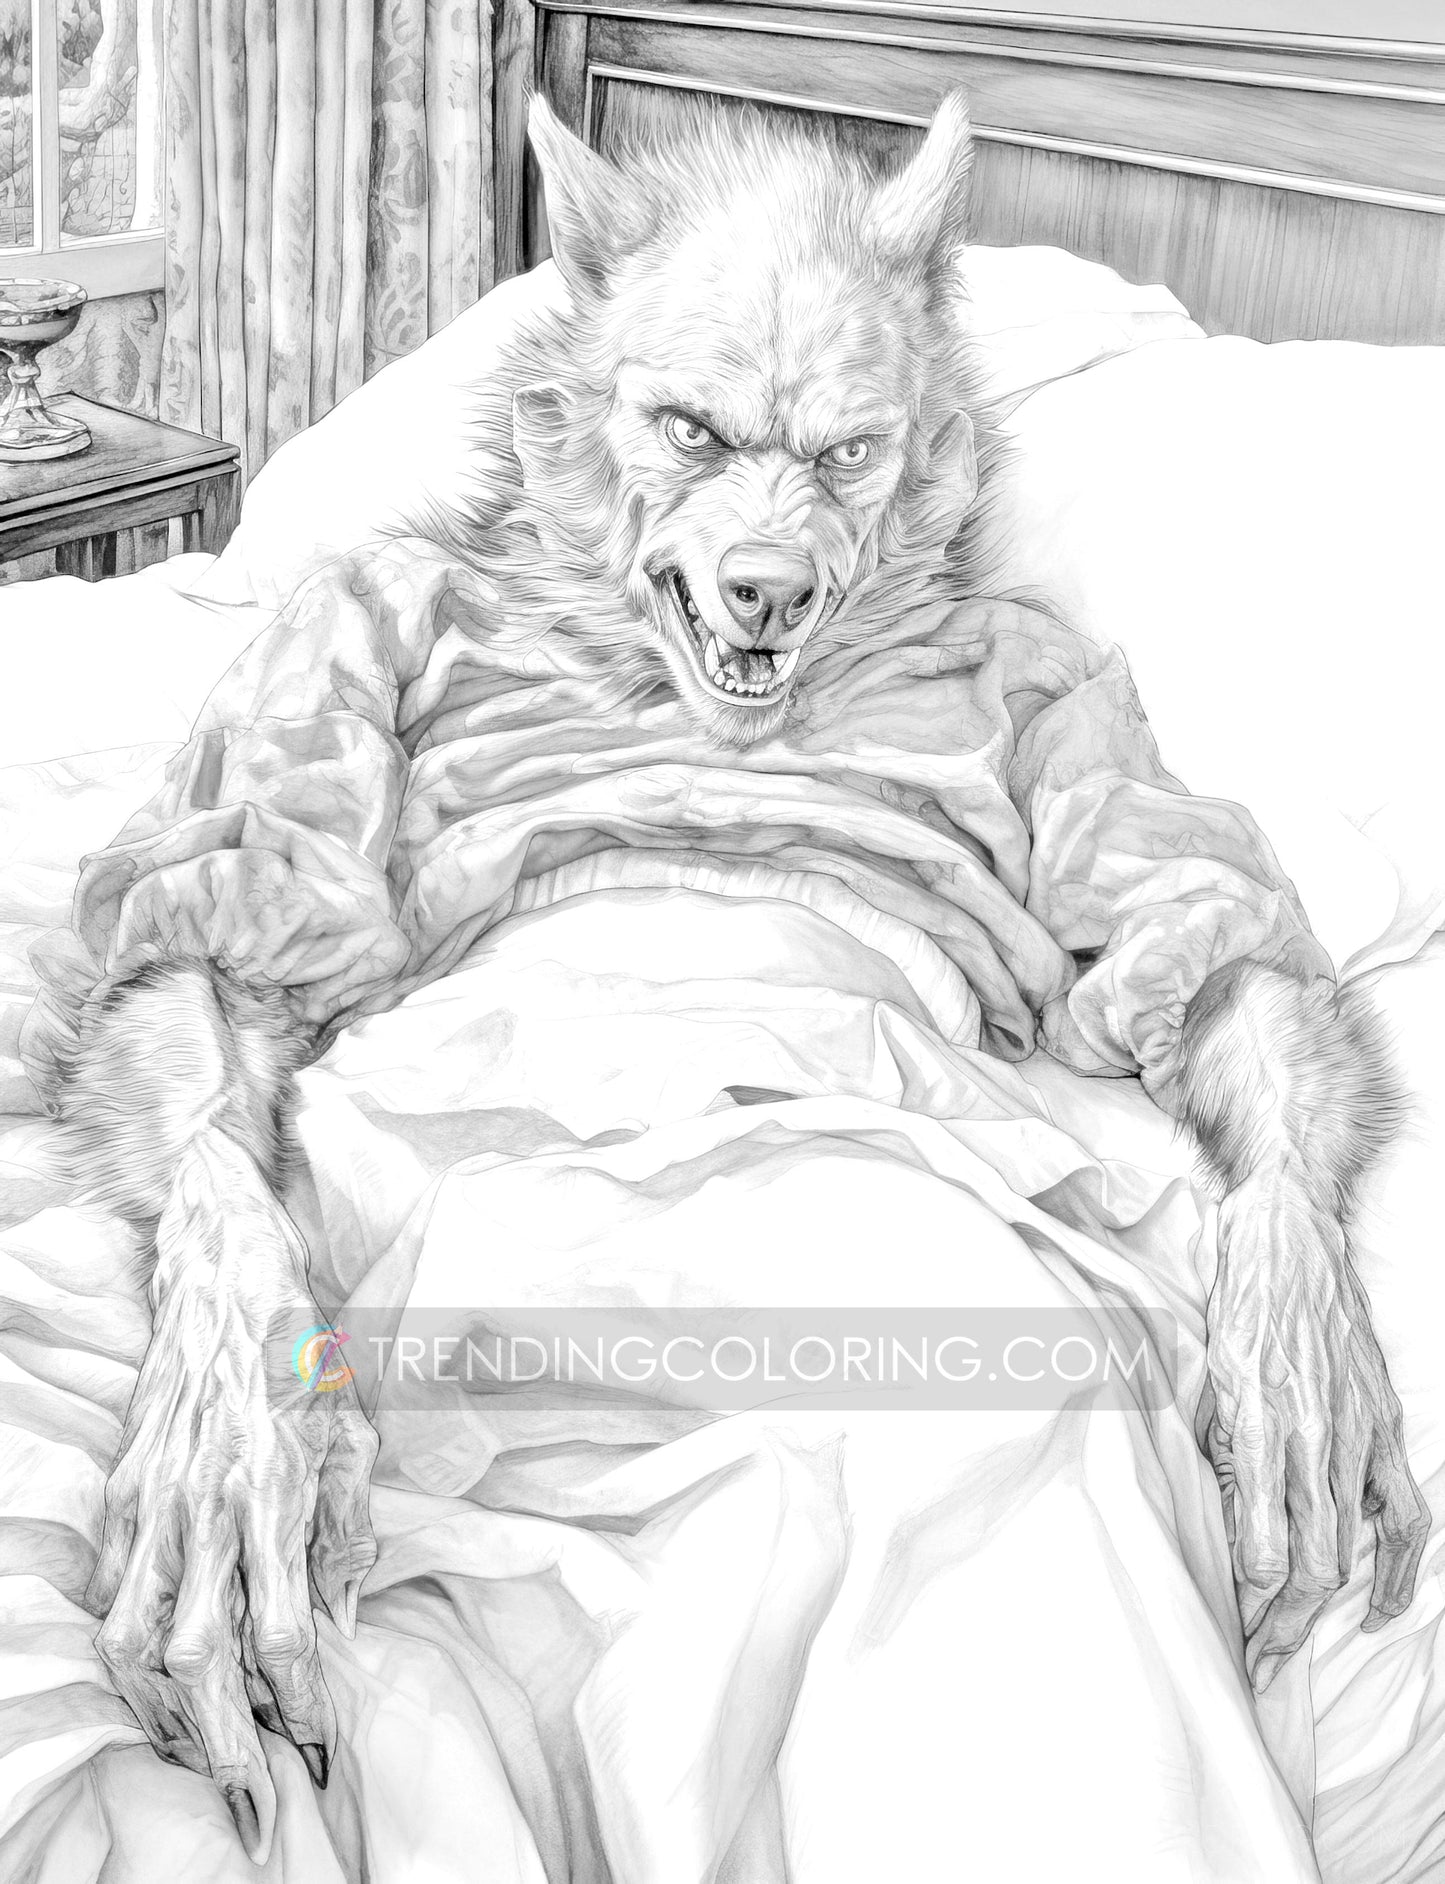 25 Red Riding Hood's Journey Grayscale Coloring Pages - Instant Download - Printable PDF Dark/Light